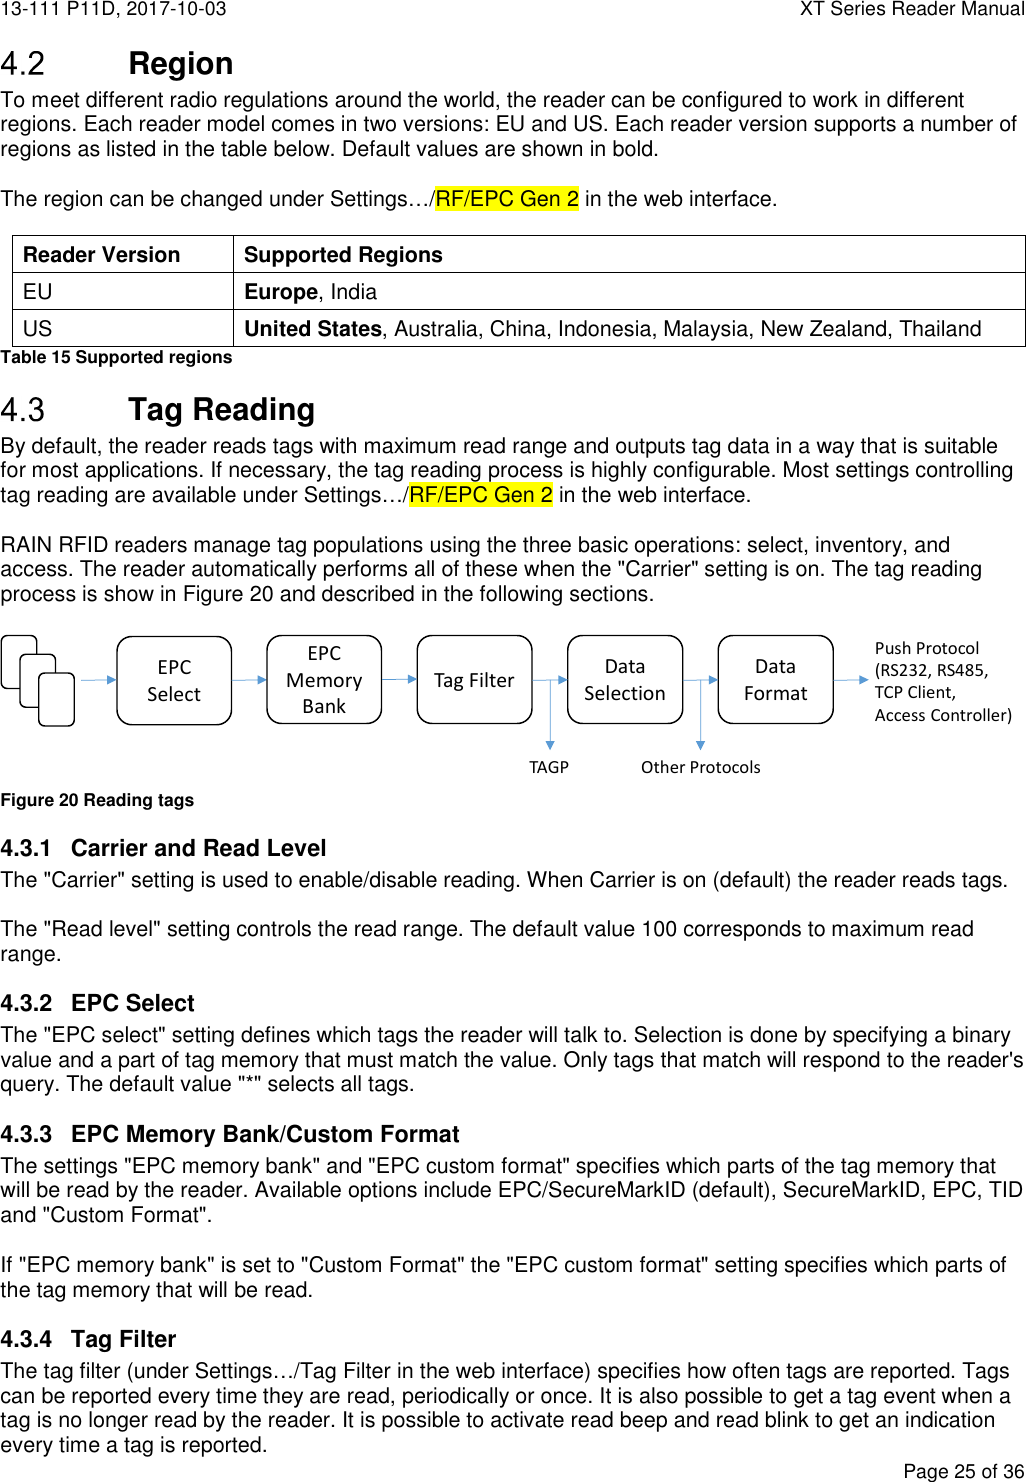 13-111 P11D, 2017-10-03  XT Series Reader Manual  Page 25 of 36   Region To meet different radio regulations around the world, the reader can be configured to work in different regions. Each reader model comes in two versions: EU and US. Each reader version supports a number of regions as listed in the table below. Default values are shown in bold.  The region can be changed under Settings…/RF/EPC Gen 2 in the web interface.  Reader Version Supported Regions EU Europe, India US United States, Australia, China, Indonesia, Malaysia, New Zealand, Thailand Table 15 Supported regions  Tag Reading By default, the reader reads tags with maximum read range and outputs tag data in a way that is suitable for most applications. If necessary, the tag reading process is highly configurable. Most settings controlling tag reading are available under Settings…/RF/EPC Gen 2 in the web interface.  RAIN RFID readers manage tag populations using the three basic operations: select, inventory, and access. The reader automatically performs all of these when the &quot;Carrier&quot; setting is on. The tag reading process is show in Figure 20 and described in the following sections.   Figure 20 Reading tags 4.3.1  Carrier and Read Level The &quot;Carrier&quot; setting is used to enable/disable reading. When Carrier is on (default) the reader reads tags.  The &quot;Read level&quot; setting controls the read range. The default value 100 corresponds to maximum read range. 4.3.2  EPC Select The &quot;EPC select&quot; setting defines which tags the reader will talk to. Selection is done by specifying a binary value and a part of tag memory that must match the value. Only tags that match will respond to the reader&apos;s query. The default value &quot;*&quot; selects all tags. 4.3.3  EPC Memory Bank/Custom Format The settings &quot;EPC memory bank&quot; and &quot;EPC custom format&quot; specifies which parts of the tag memory that will be read by the reader. Available options include EPC/SecureMarkID (default), SecureMarkID, EPC, TID and &quot;Custom Format&quot;.  If &quot;EPC memory bank&quot; is set to &quot;Custom Format&quot; the &quot;EPC custom format&quot; setting specifies which parts of the tag memory that will be read. 4.3.4  Tag Filter The tag filter (under Settings…/Tag Filter in the web interface) specifies how often tags are reported. Tags can be reported every time they are read, periodically or once. It is also possible to get a tag event when a tag is no longer read by the reader. It is possible to activate read beep and read blink to get an indication every time a tag is reported. EPC Select Tag Filter Data SelectionData FormatEPC MemoryBankTAGP Other ProtocolsPush Protocol(RS232, RS485,TCP Client,Access Controller)